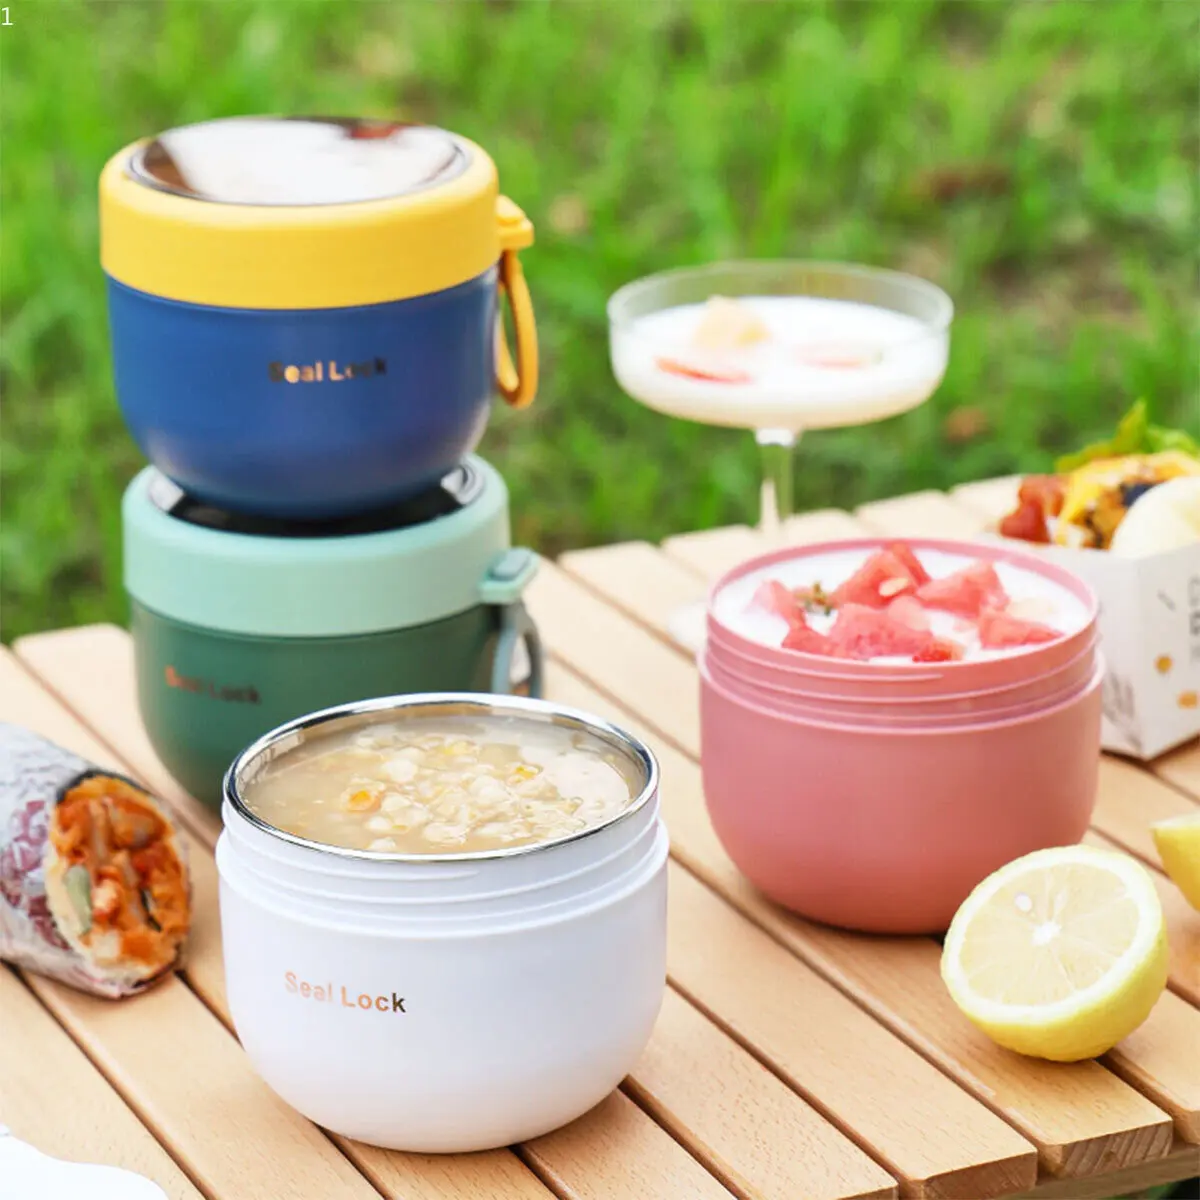 https://ae01.alicdn.com/kf/Sd2bb07856a9b468cafd22ecde3a3aef9j/600ML-Stainless-Steel-Lunch-Box-Food-Container-Flask-Soup-Storage-Vacuum-Thermal-Jar-Thermos-Cup-Bento.jpg